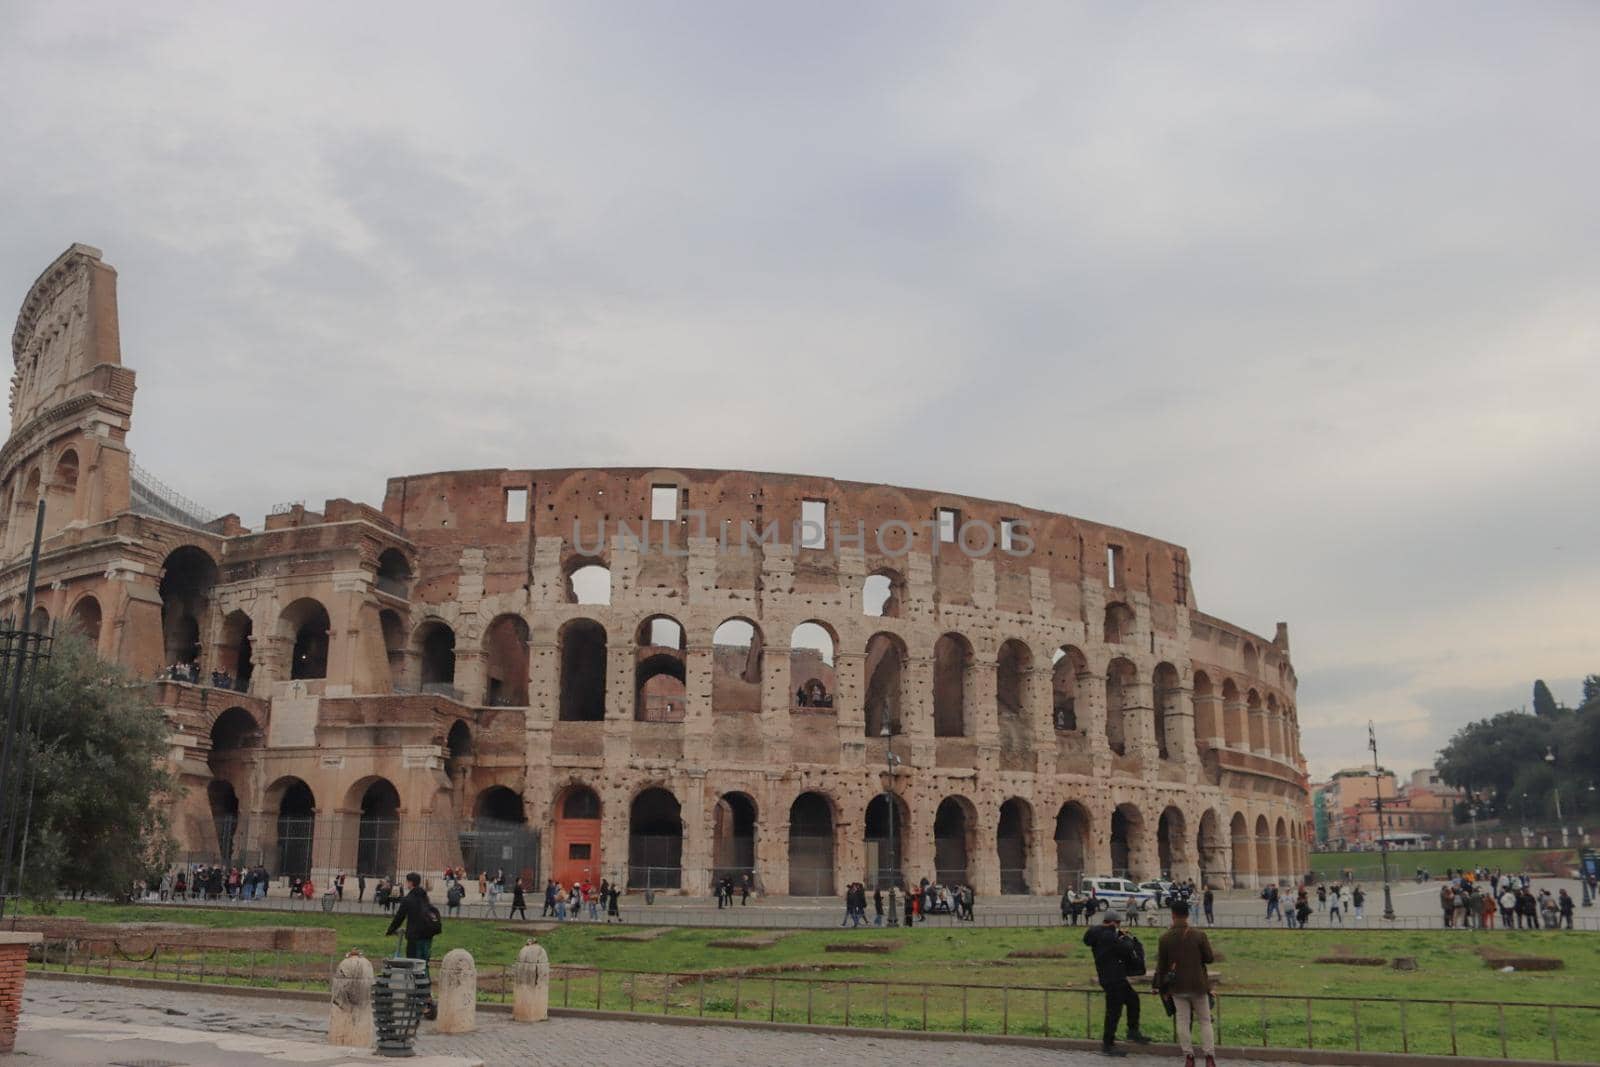 Panoramic view around the Colosseum in city of Rome by yohananegusse